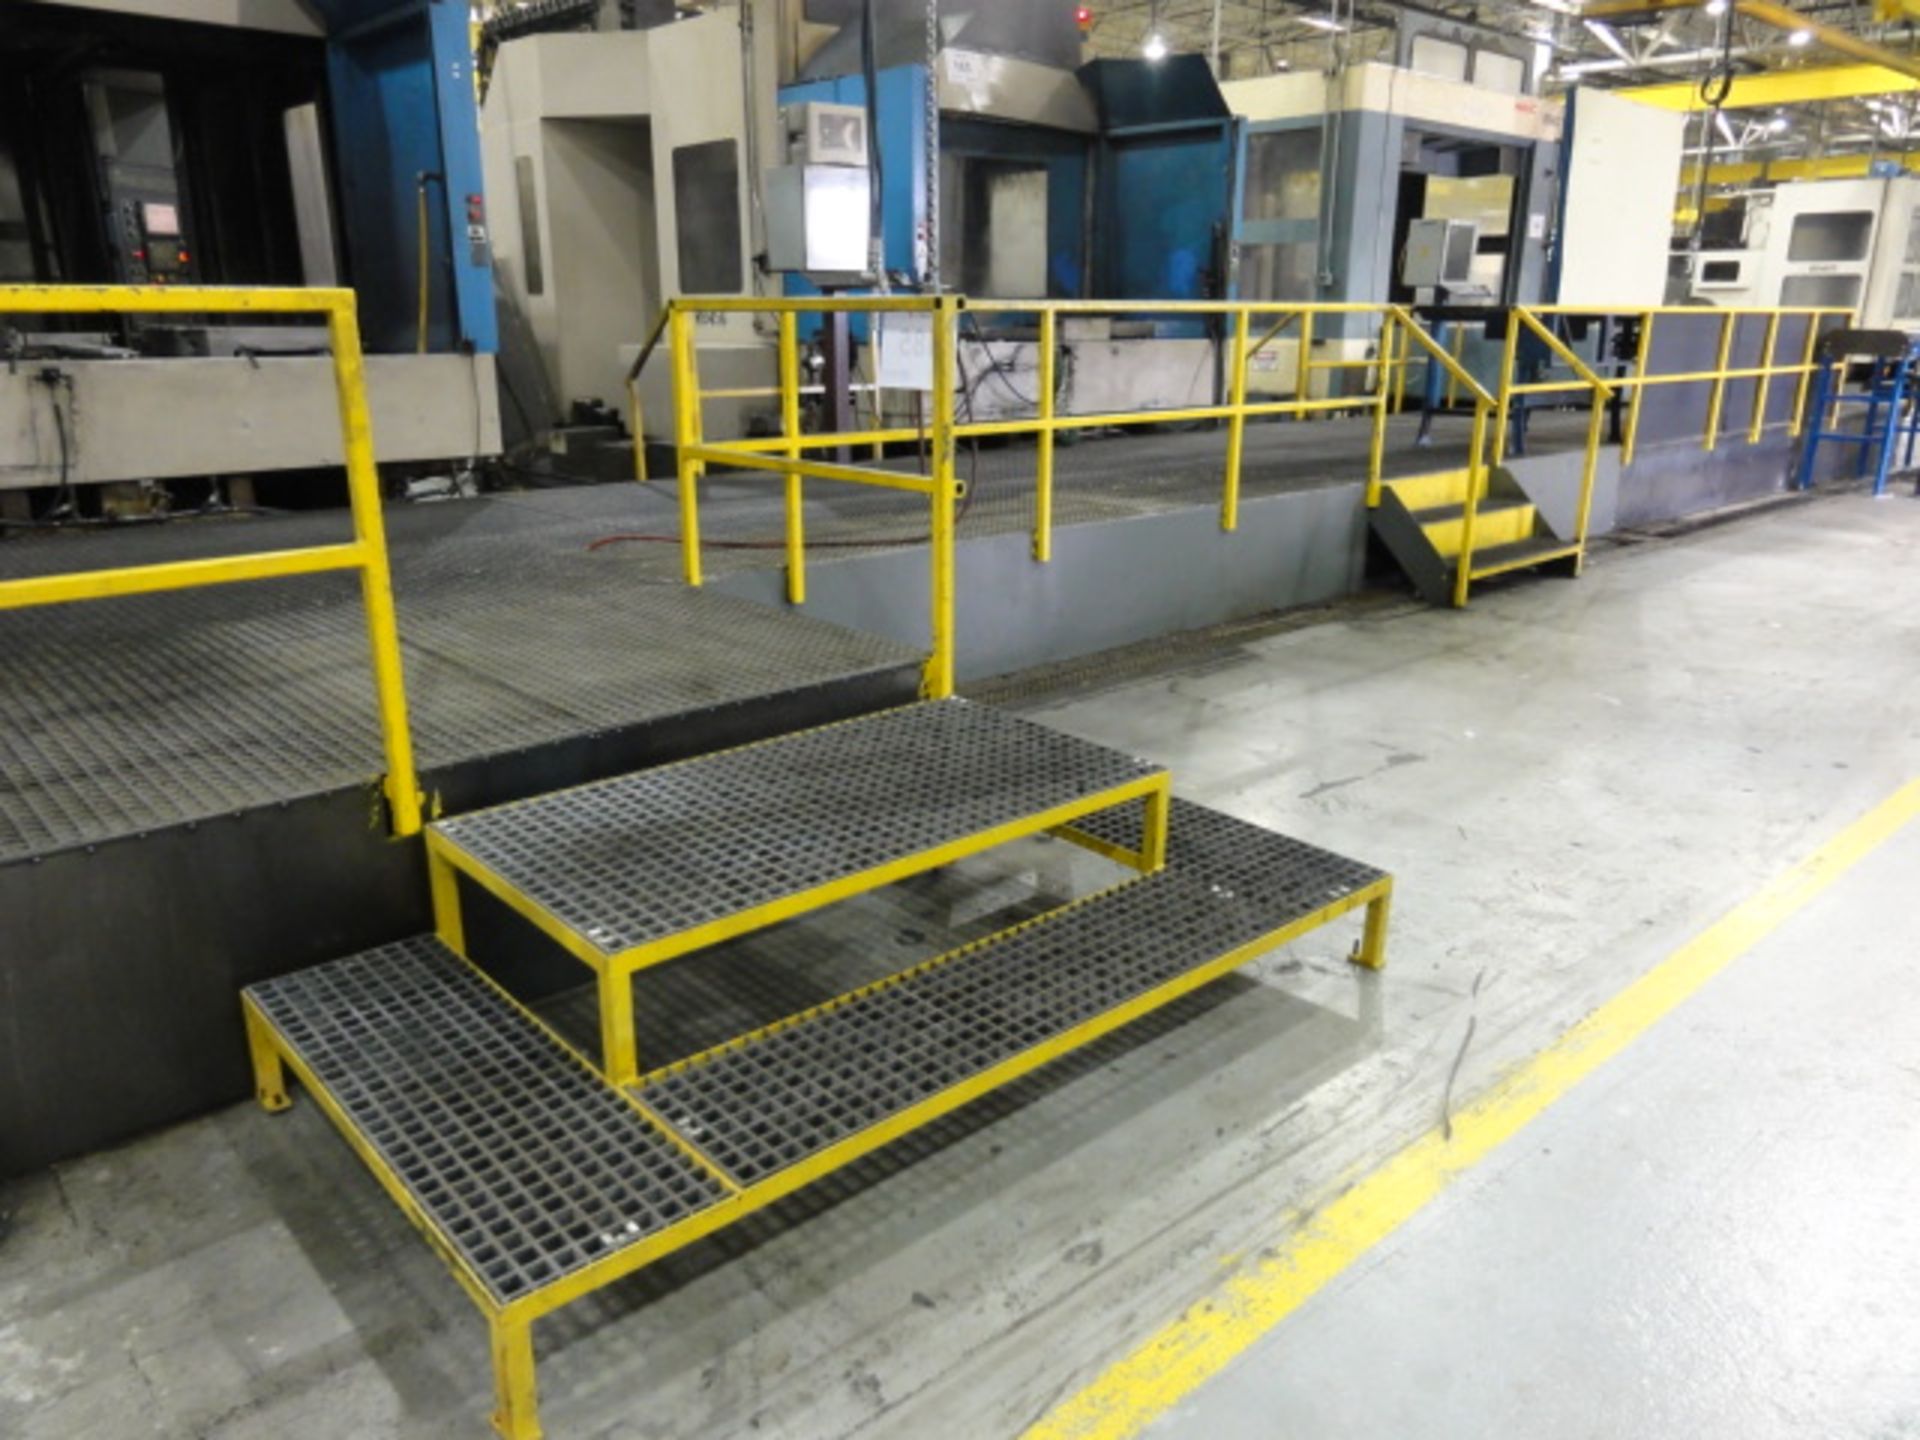 Operator Platform Approx. Size 40' x 10' w/ Anti Skid Grated Decking, (5) Staircases, Associated